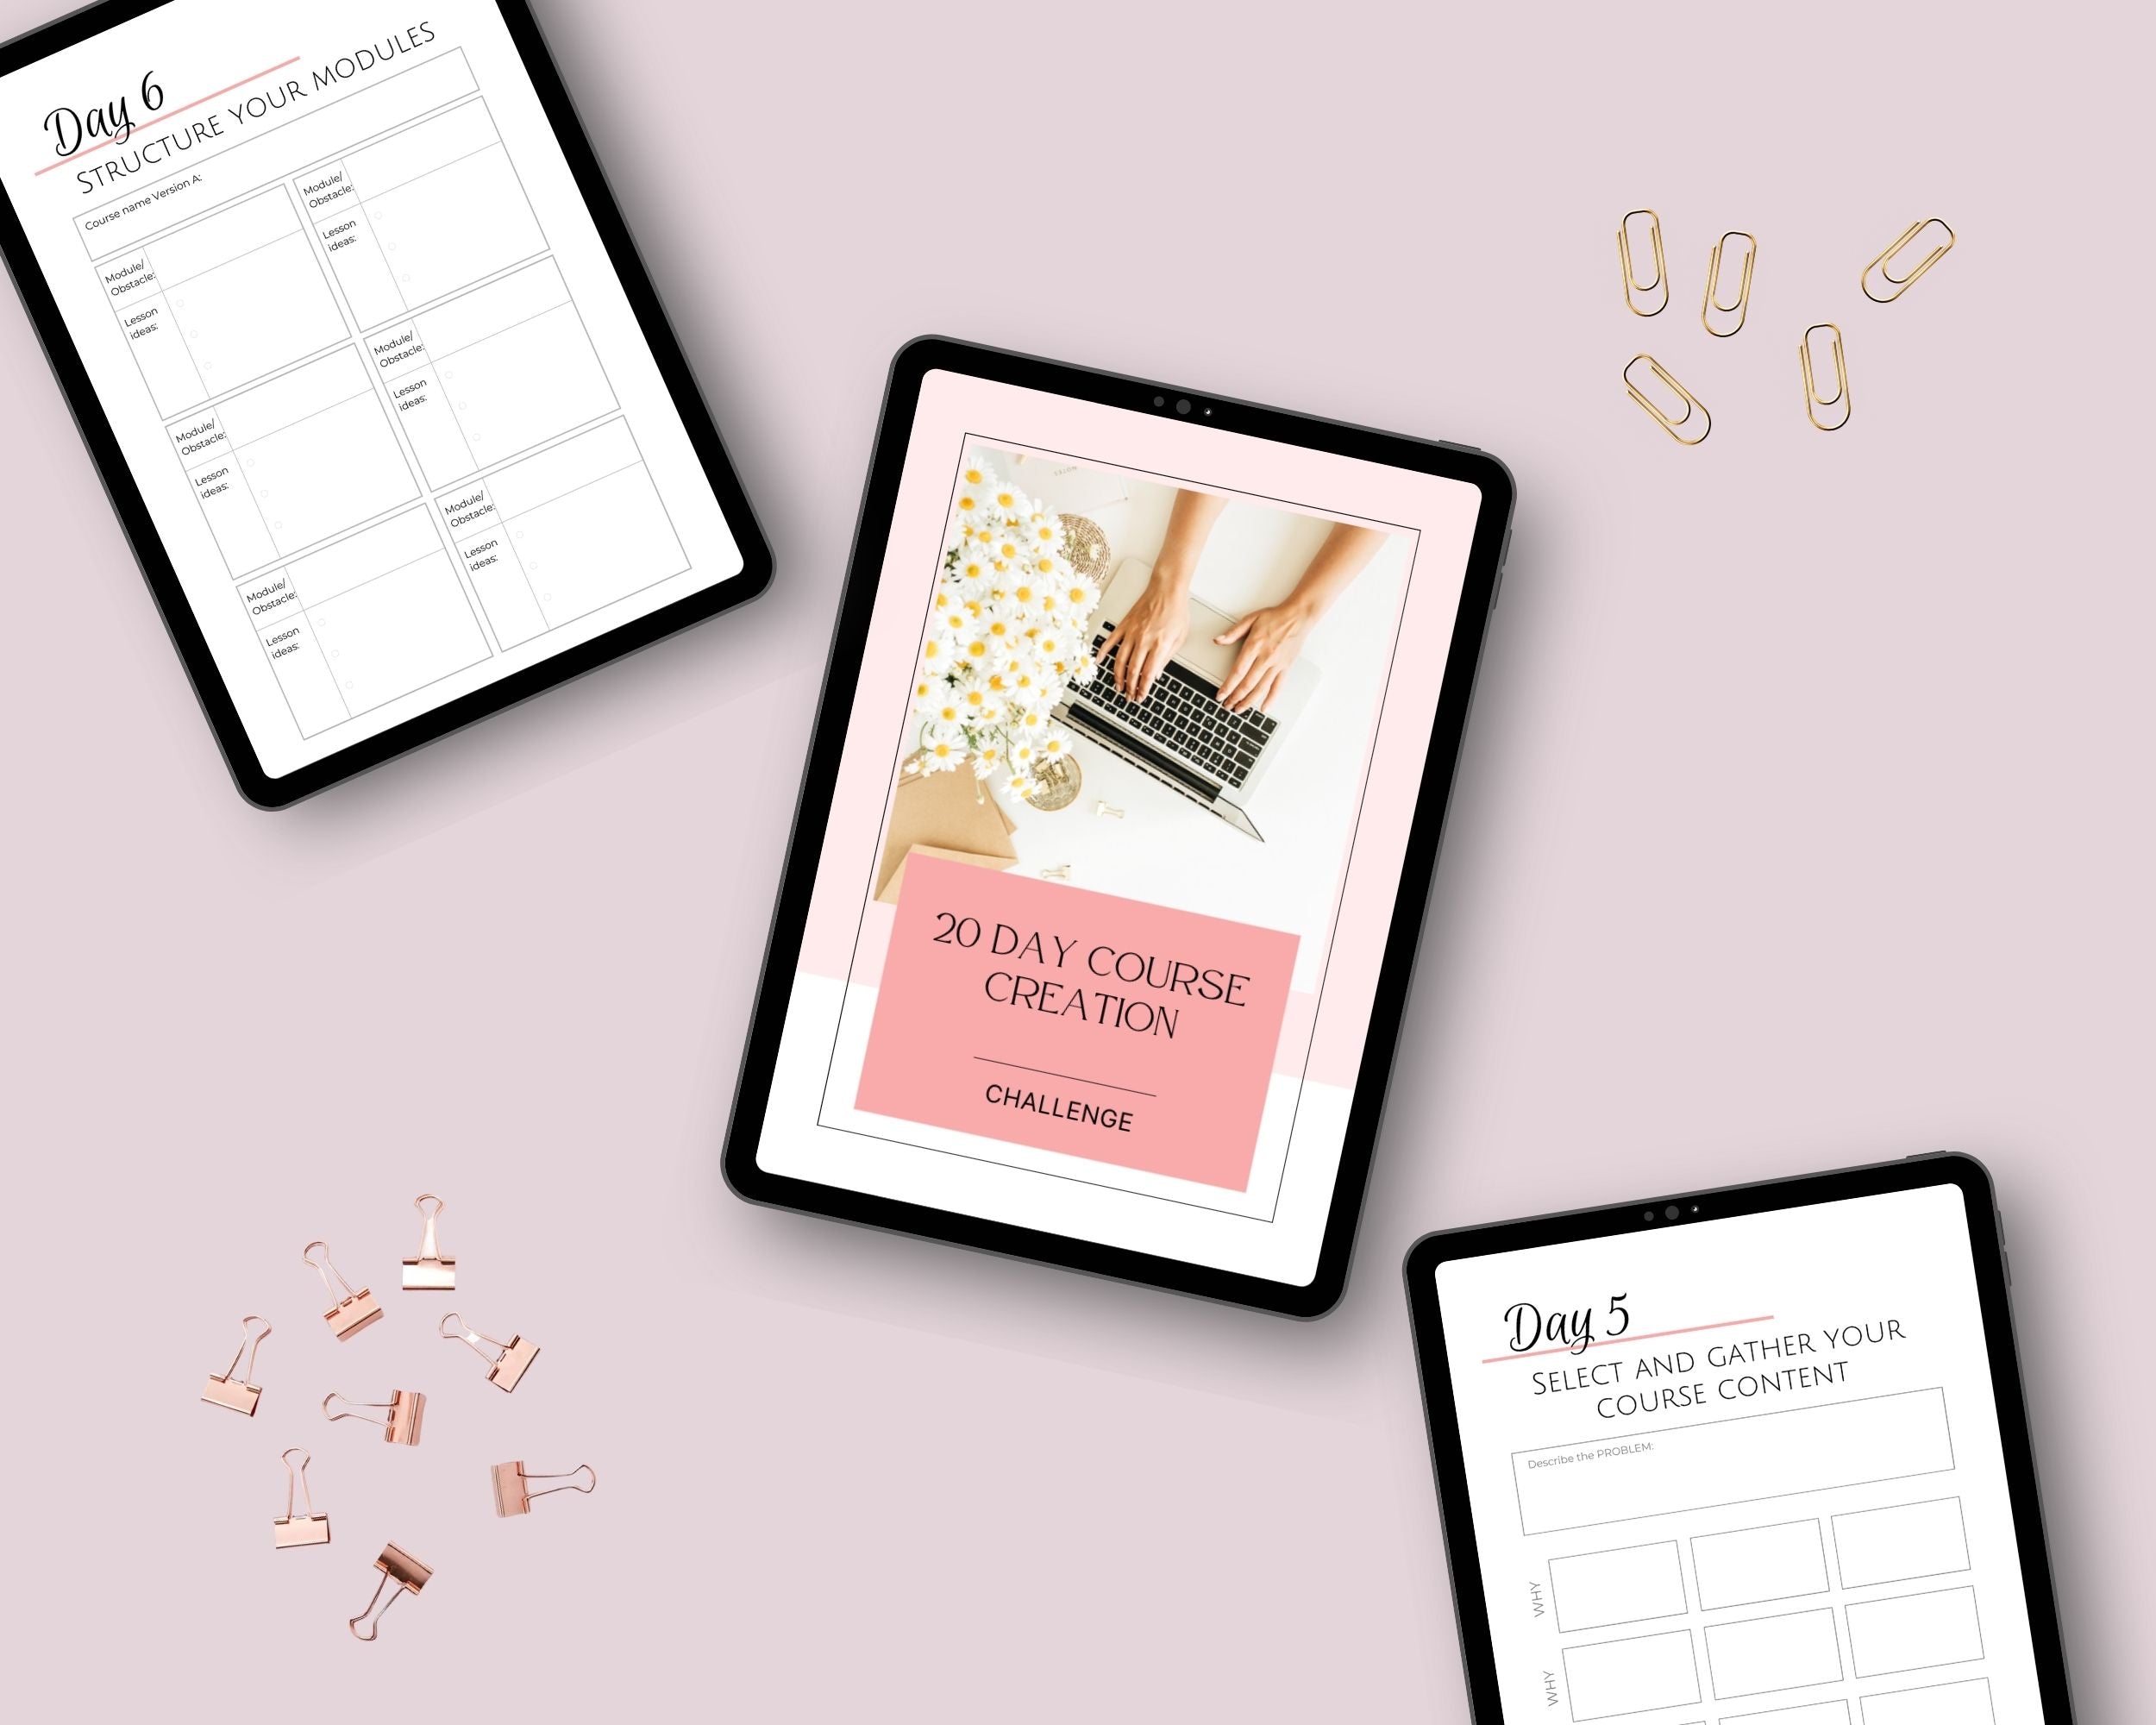 20 Day Course Creation Challenge | Course Launch Planner | Editable Canva Template A4 Size